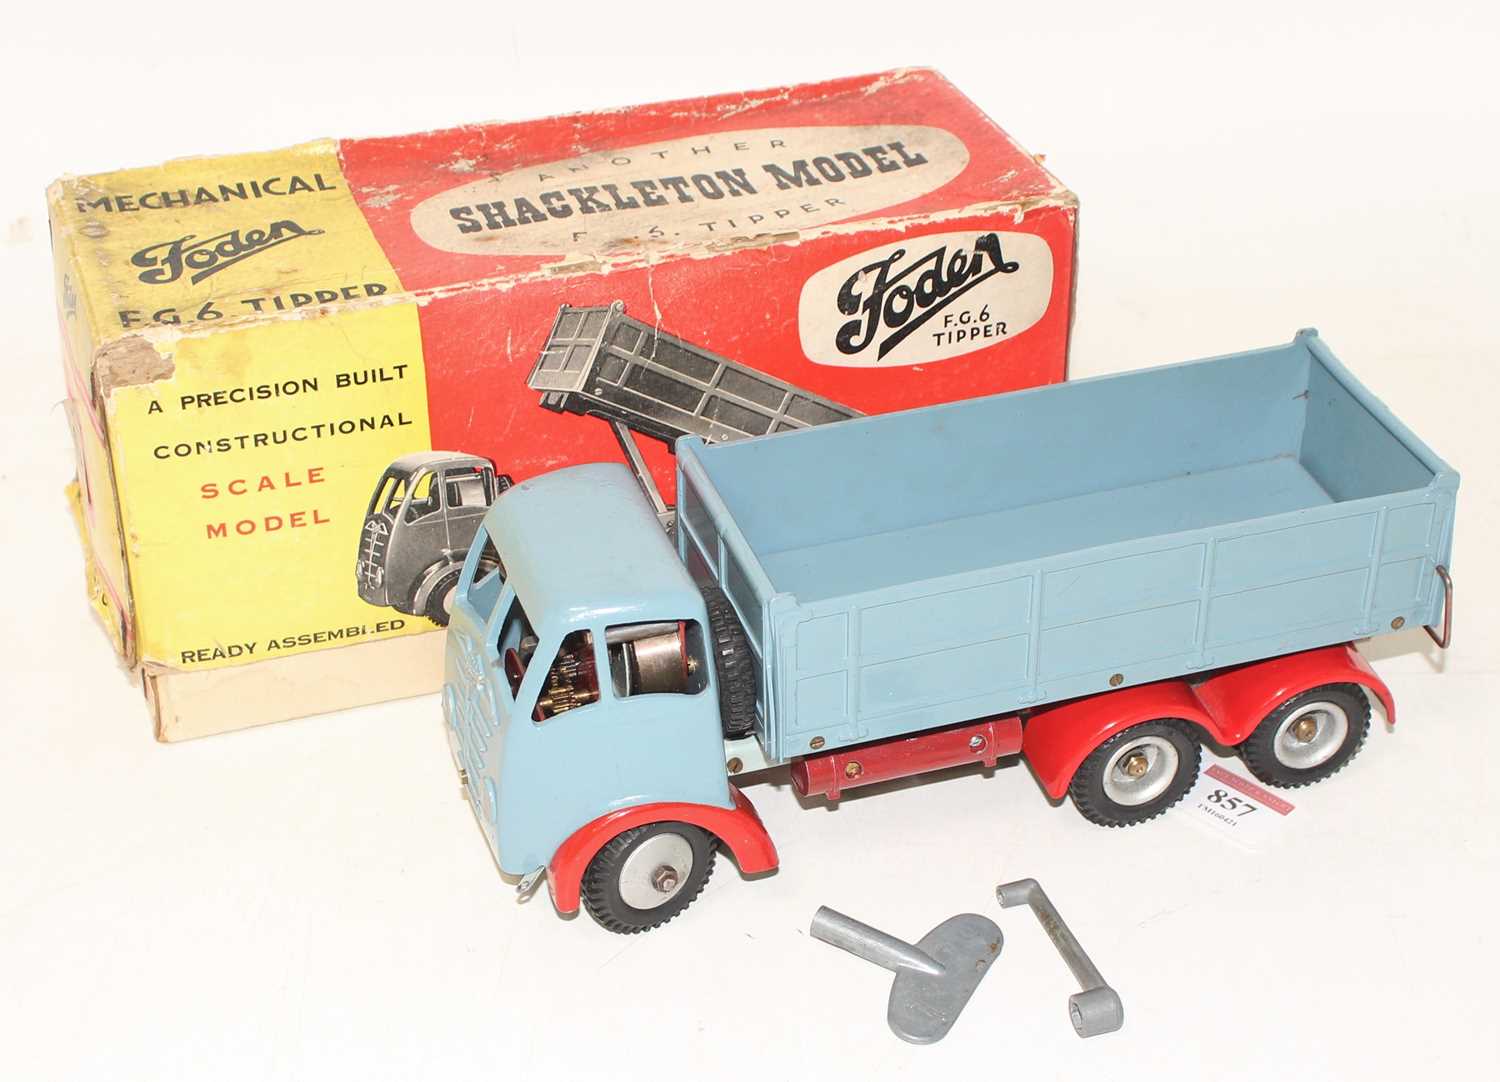 A Shackleton Models FG6 tipper comprising of blue to grey and scarlet red body, fitted with